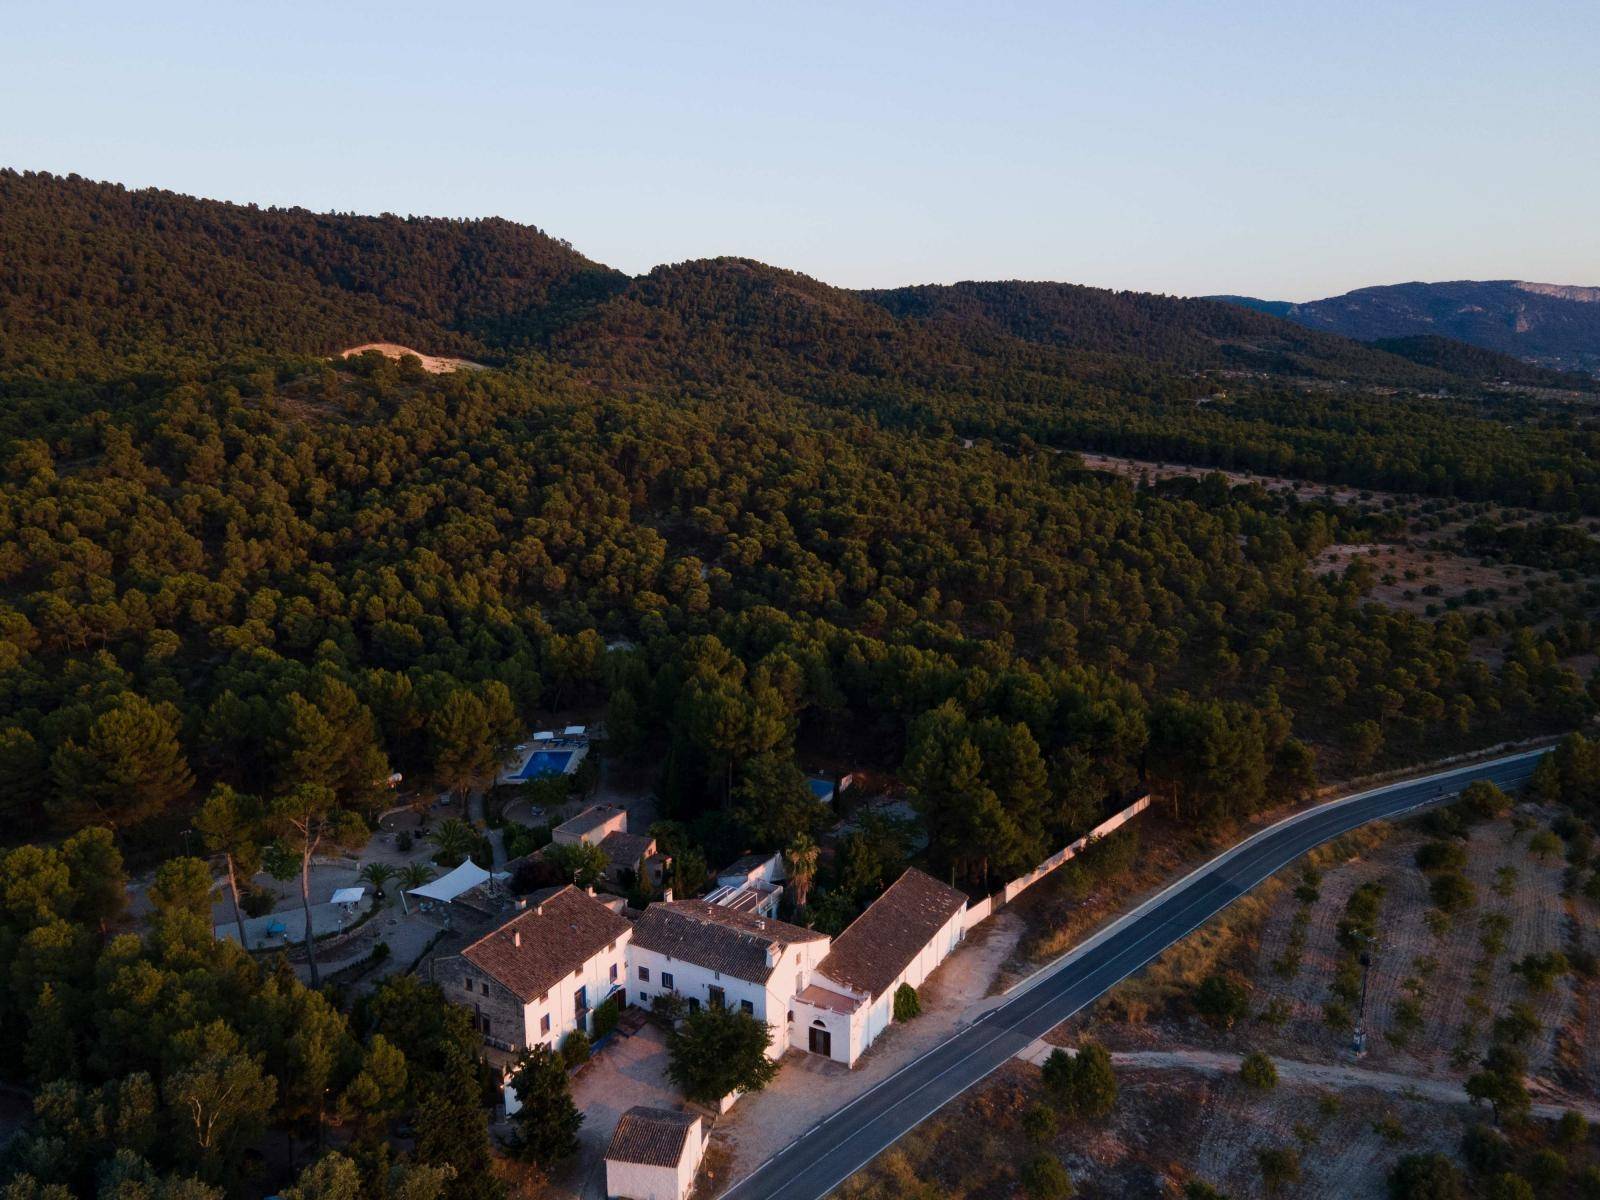 RURAL HOTEL IN THE MIDDLE OF NATURE IN BIAR - ALICANTE